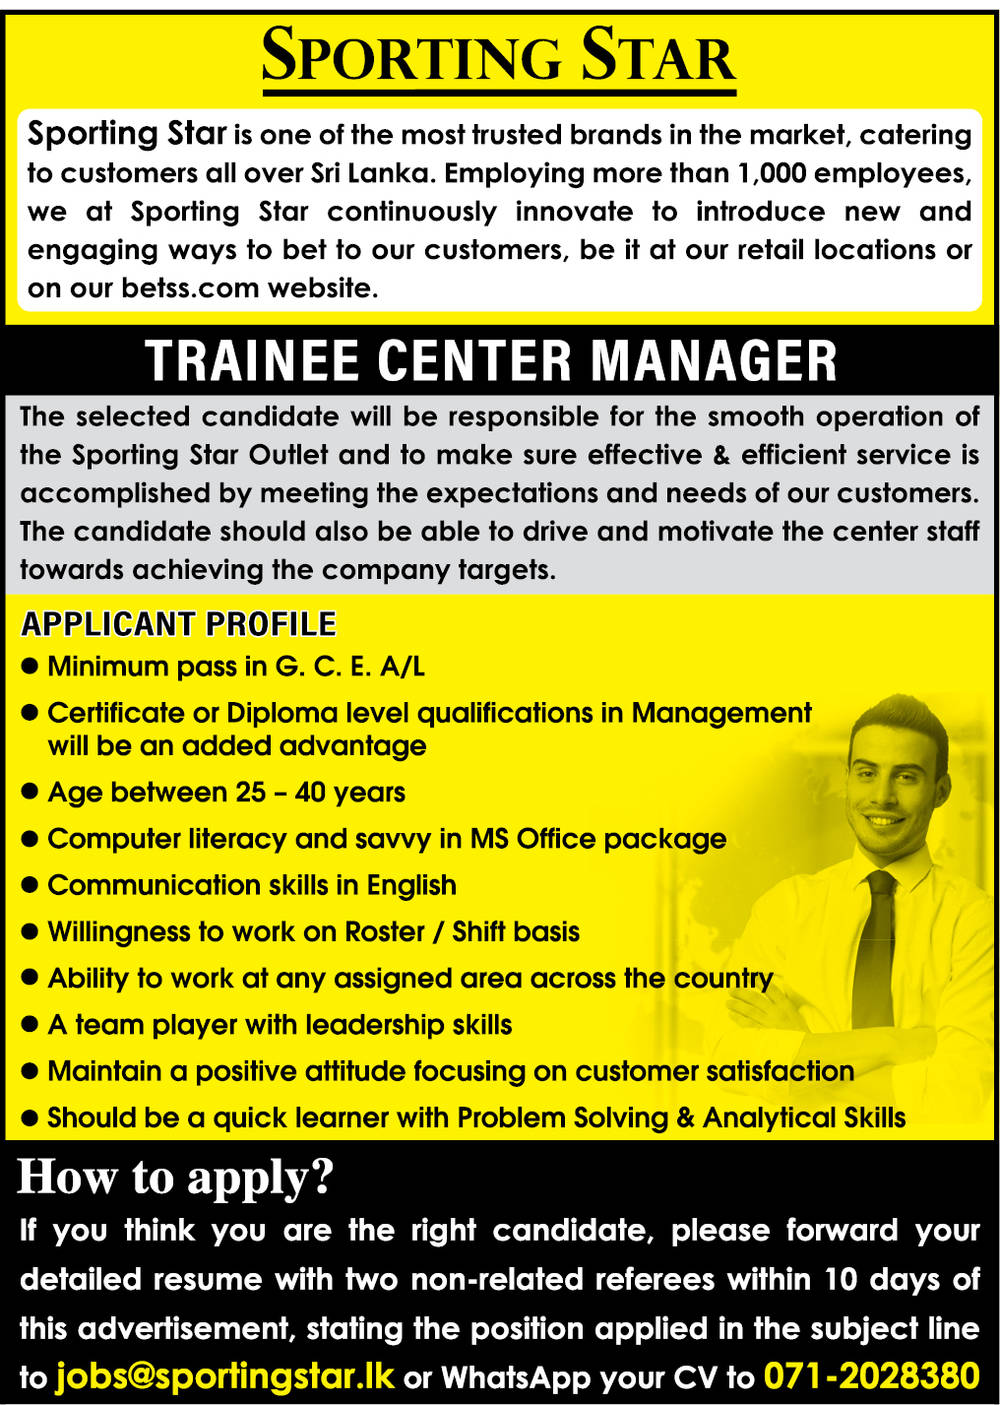 Trainee Center Manager